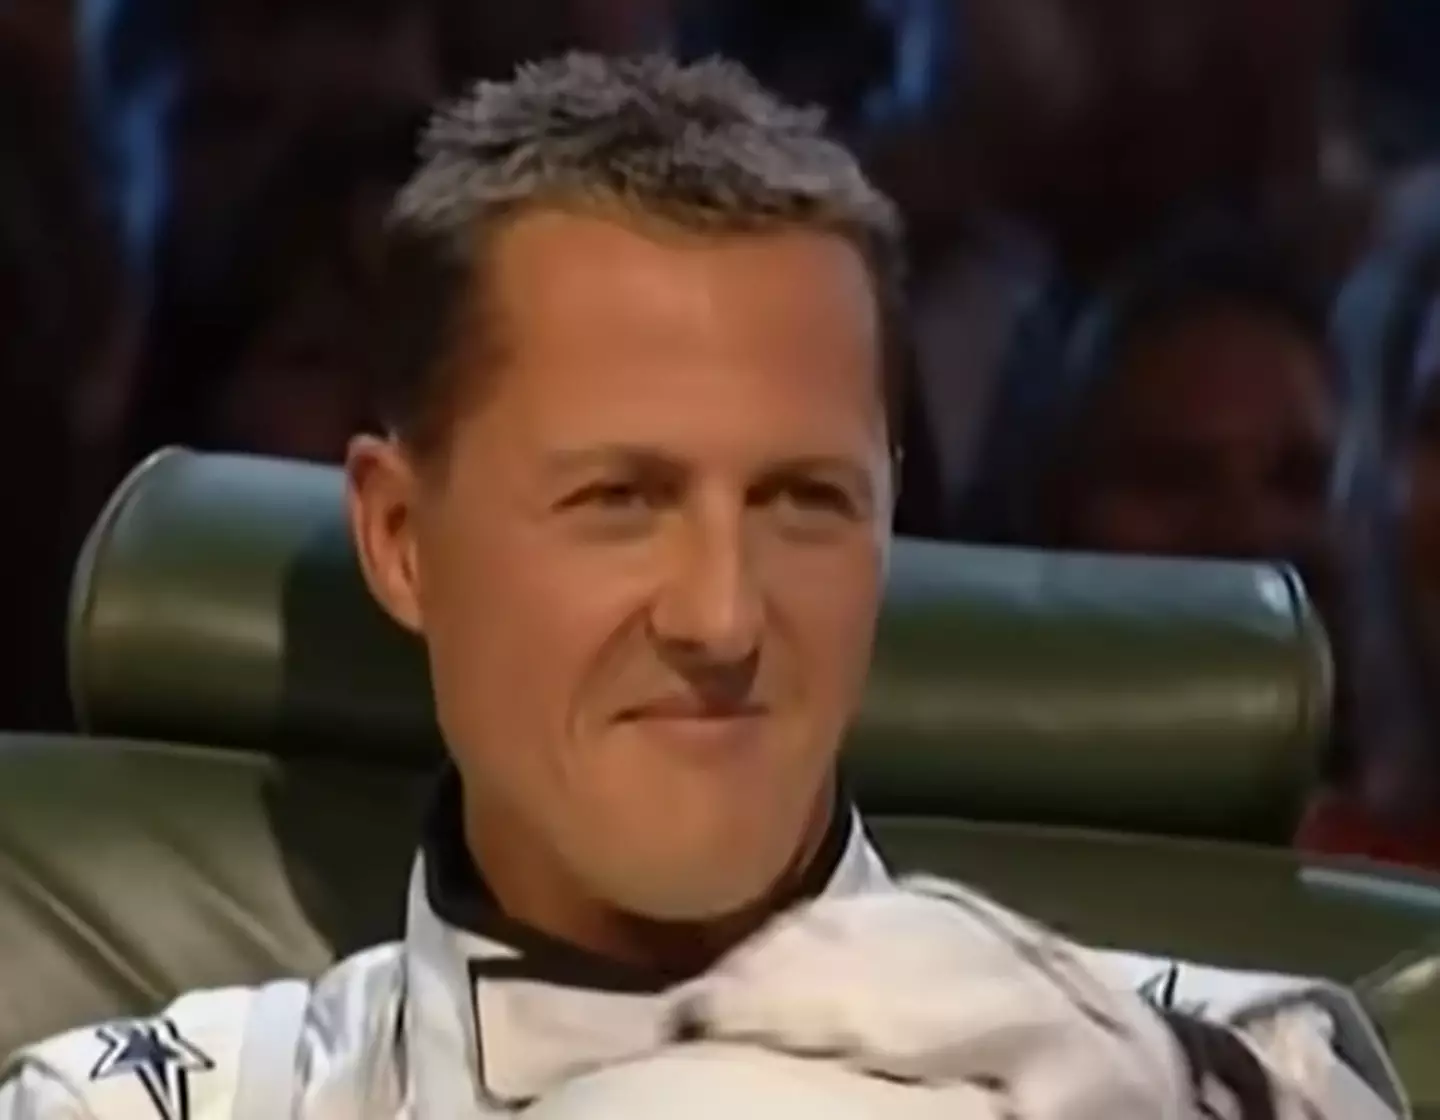 The moment Michael Schumacher took off The Stig's helmet is one of the most legendary on Top Gear.